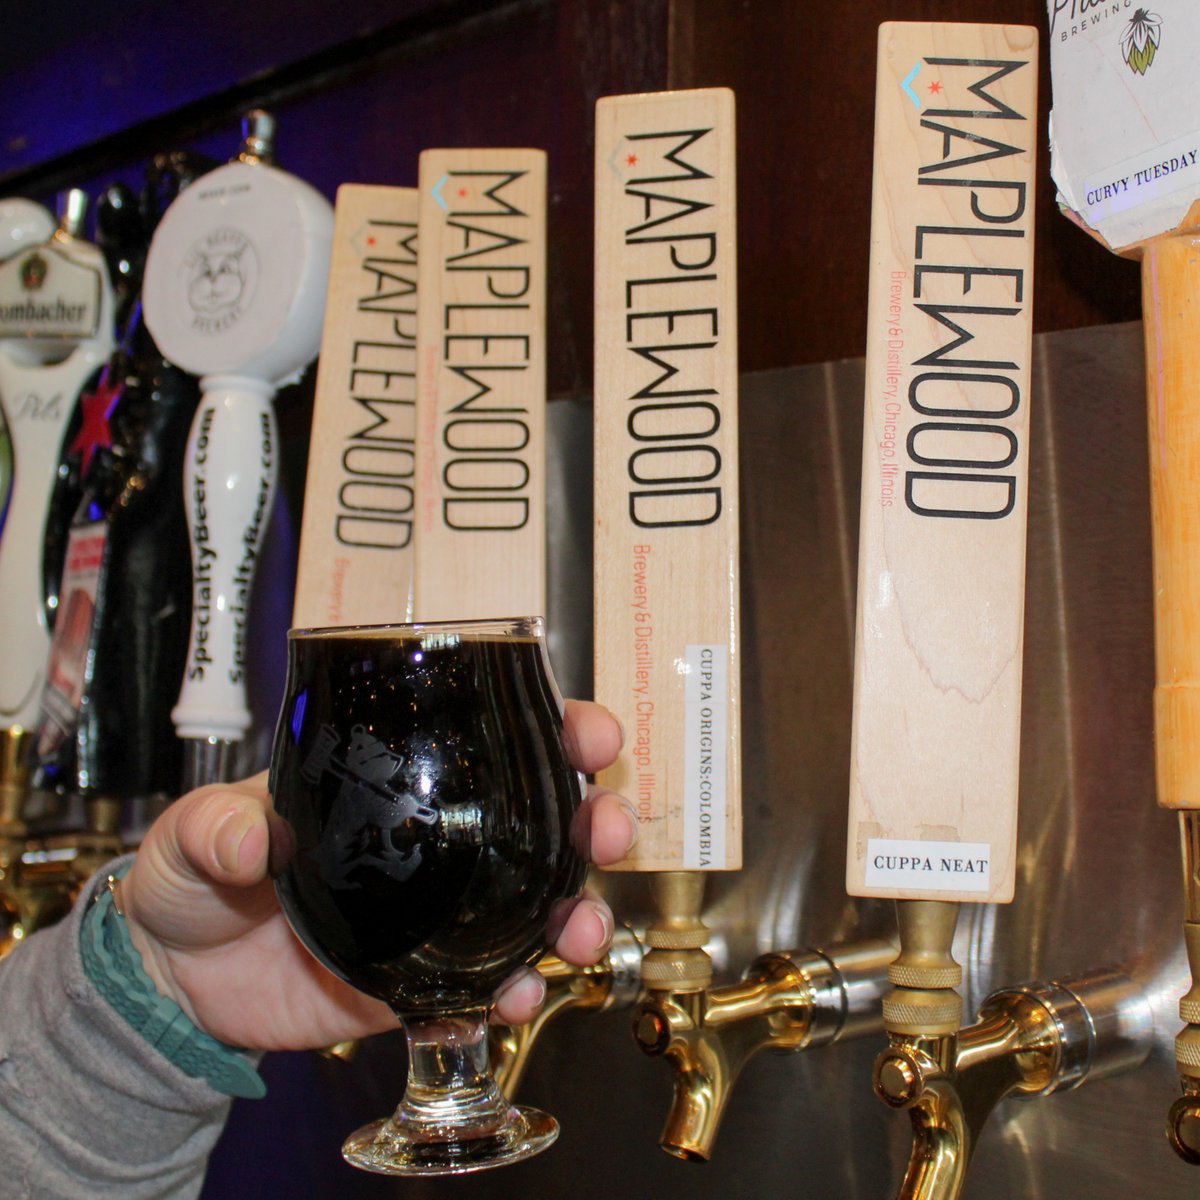 Today’s featured stout is:

Maplewood | Cuppa Neat Elijah Craig 18
🍺 An American Imperial stout blended from Cuppa aged in Elijah Craig 18 barrels for 15 months. 13% ABV.

#StoutMonth #CraftStouts #80TapBeers #TheBrassTapGreenfield